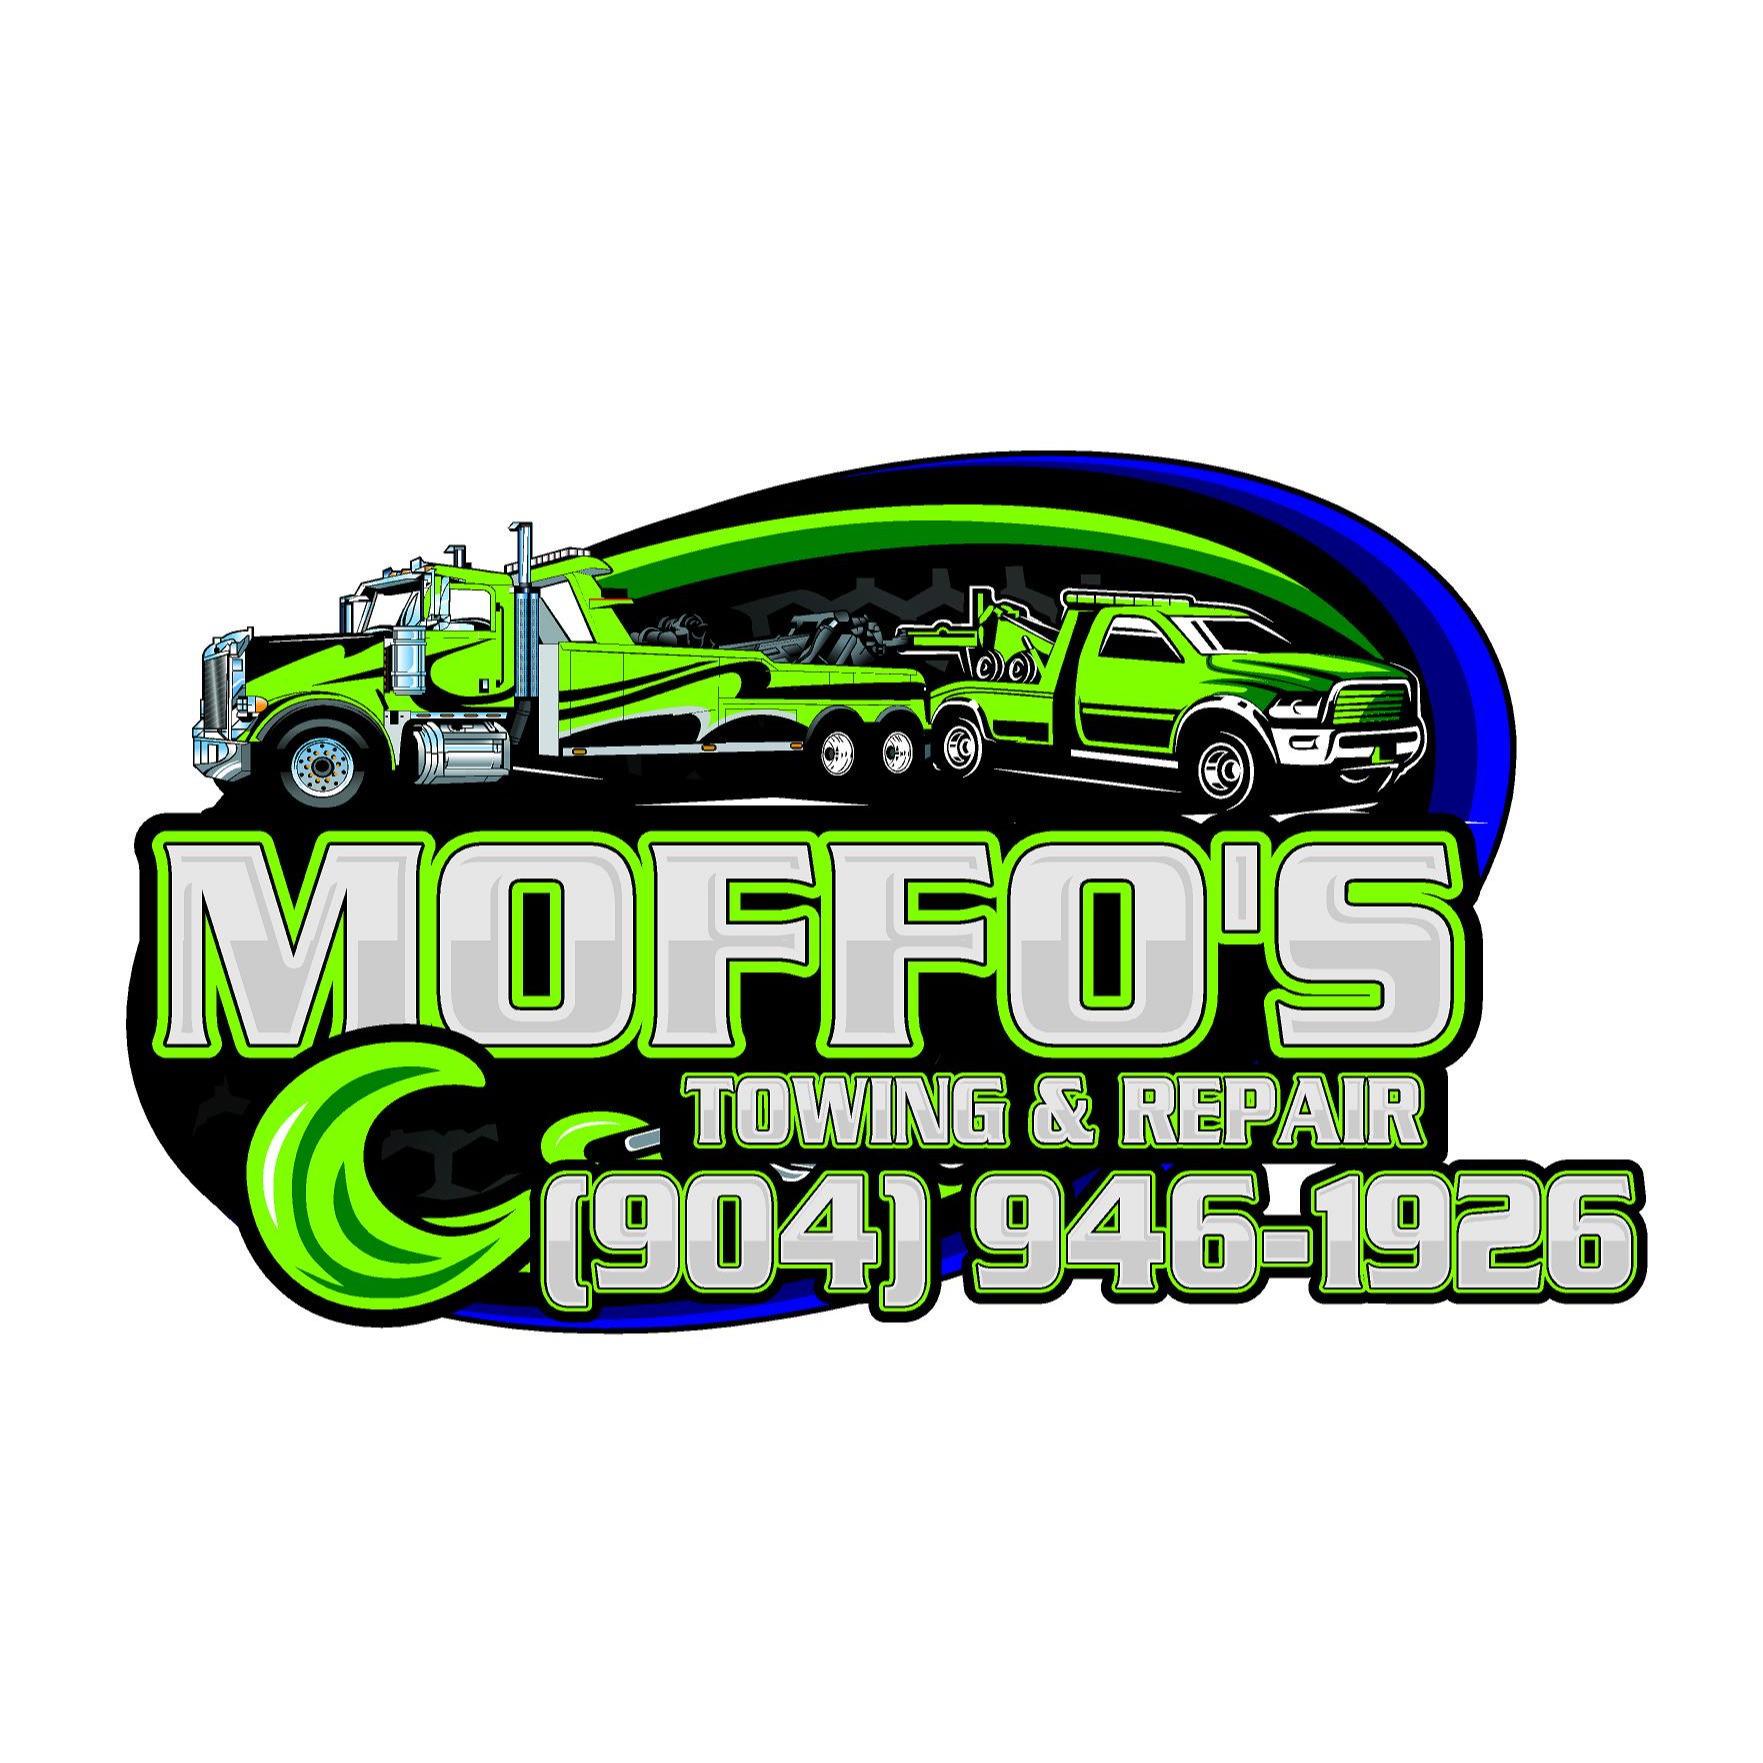 Moffo's Towing & Repair - Jacksonville, FL - (904)946-1926 | ShowMeLocal.com